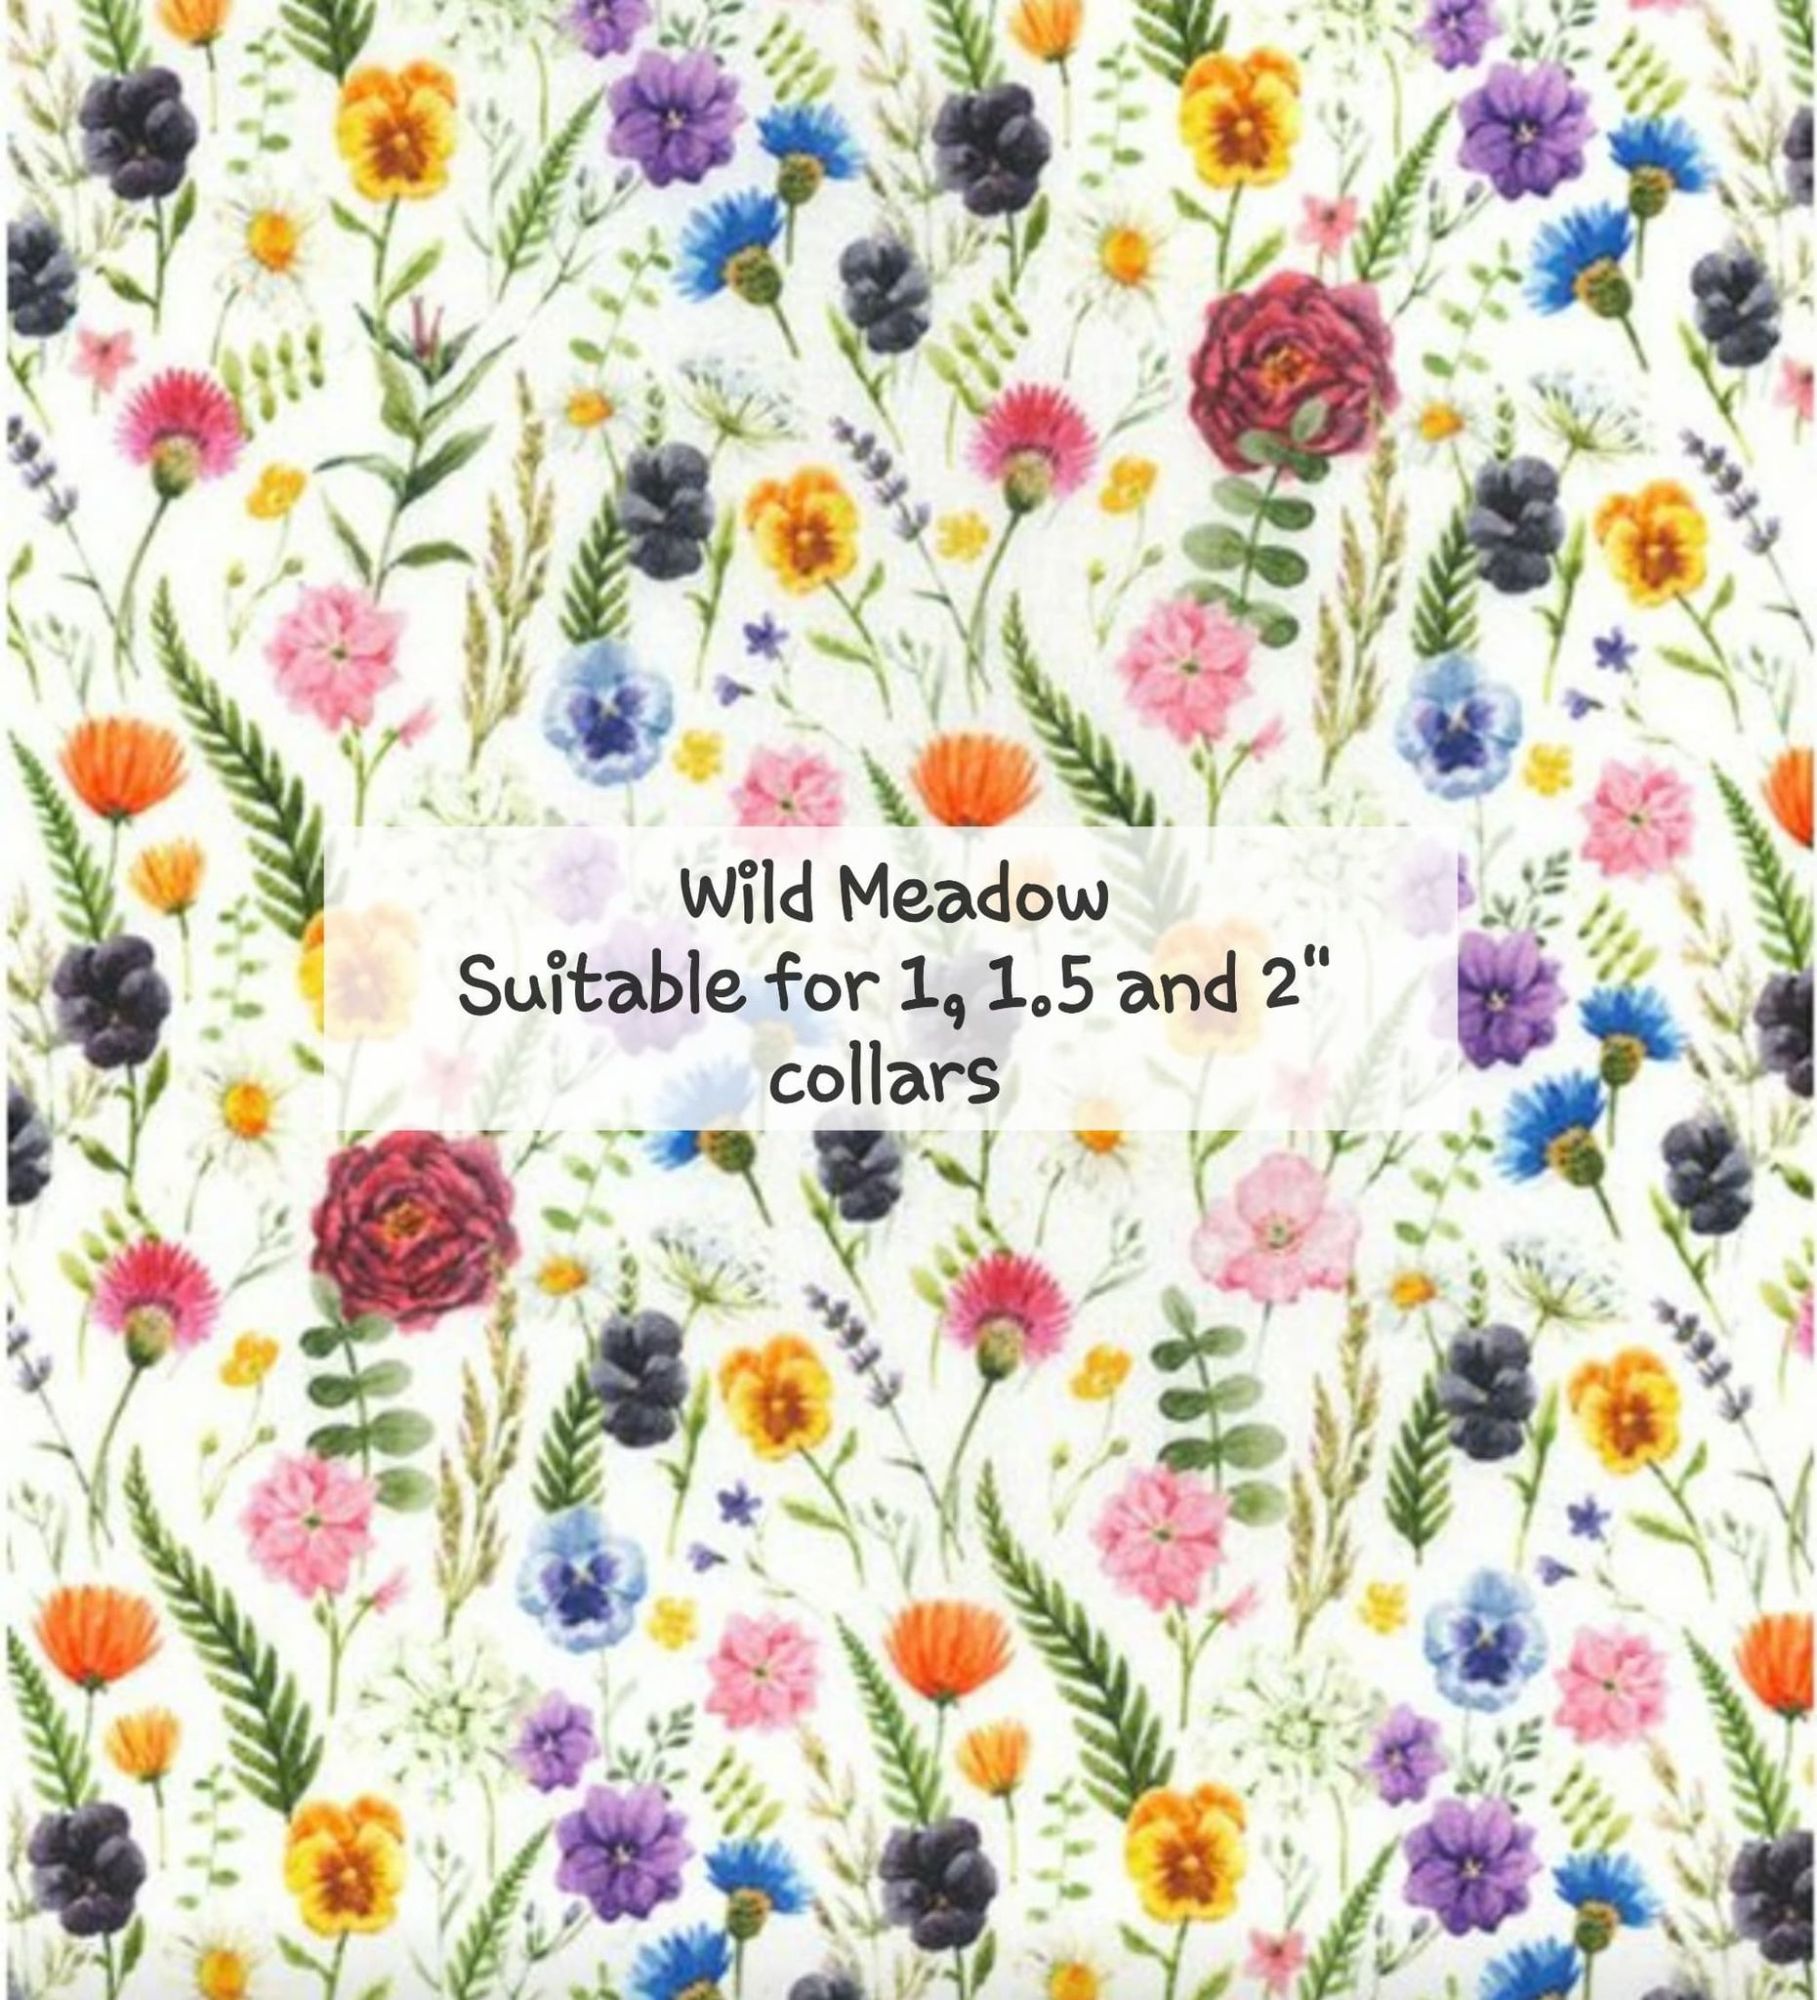 Wild Meadow - Suitable for 1, 1.5 and 2 inch collars